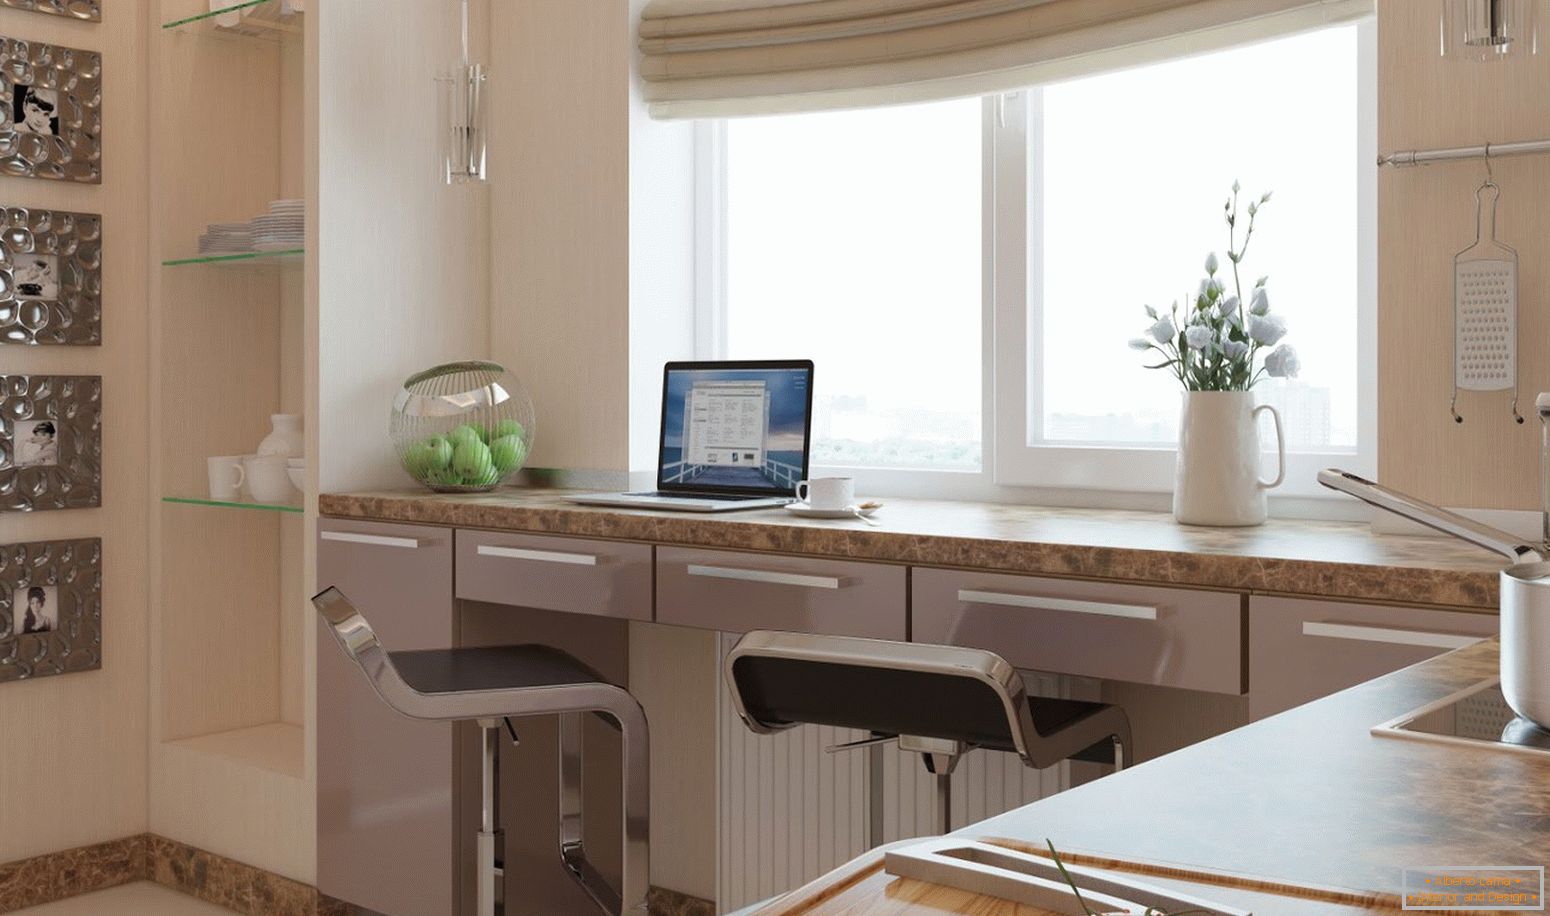 Work area in the kitchen, combined with a window sill